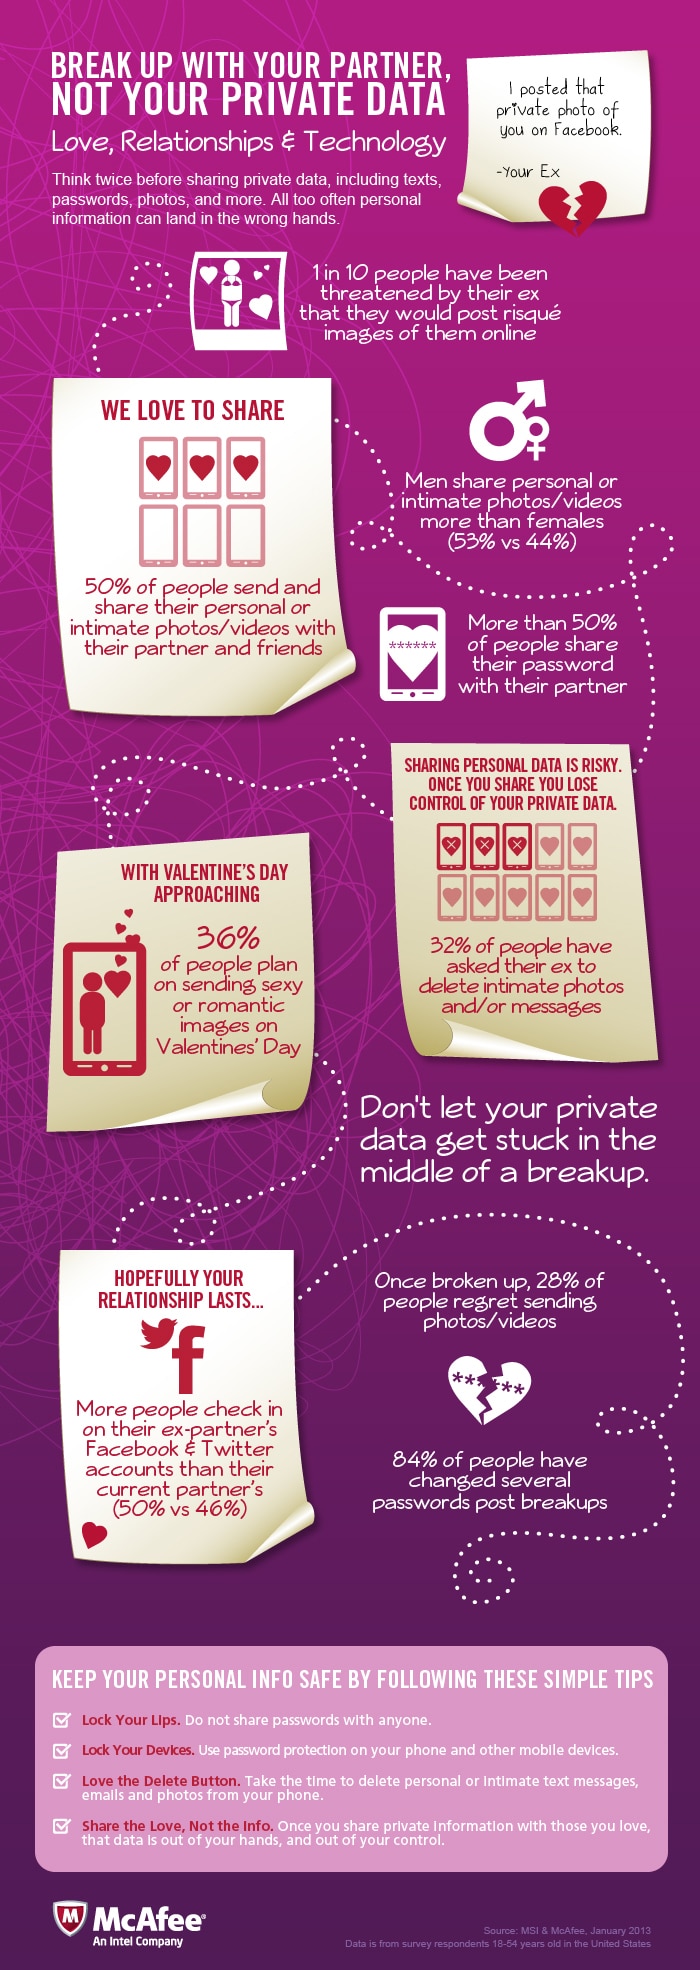 Break Up With Your Partner, Not Your Digital Property [Infographic]